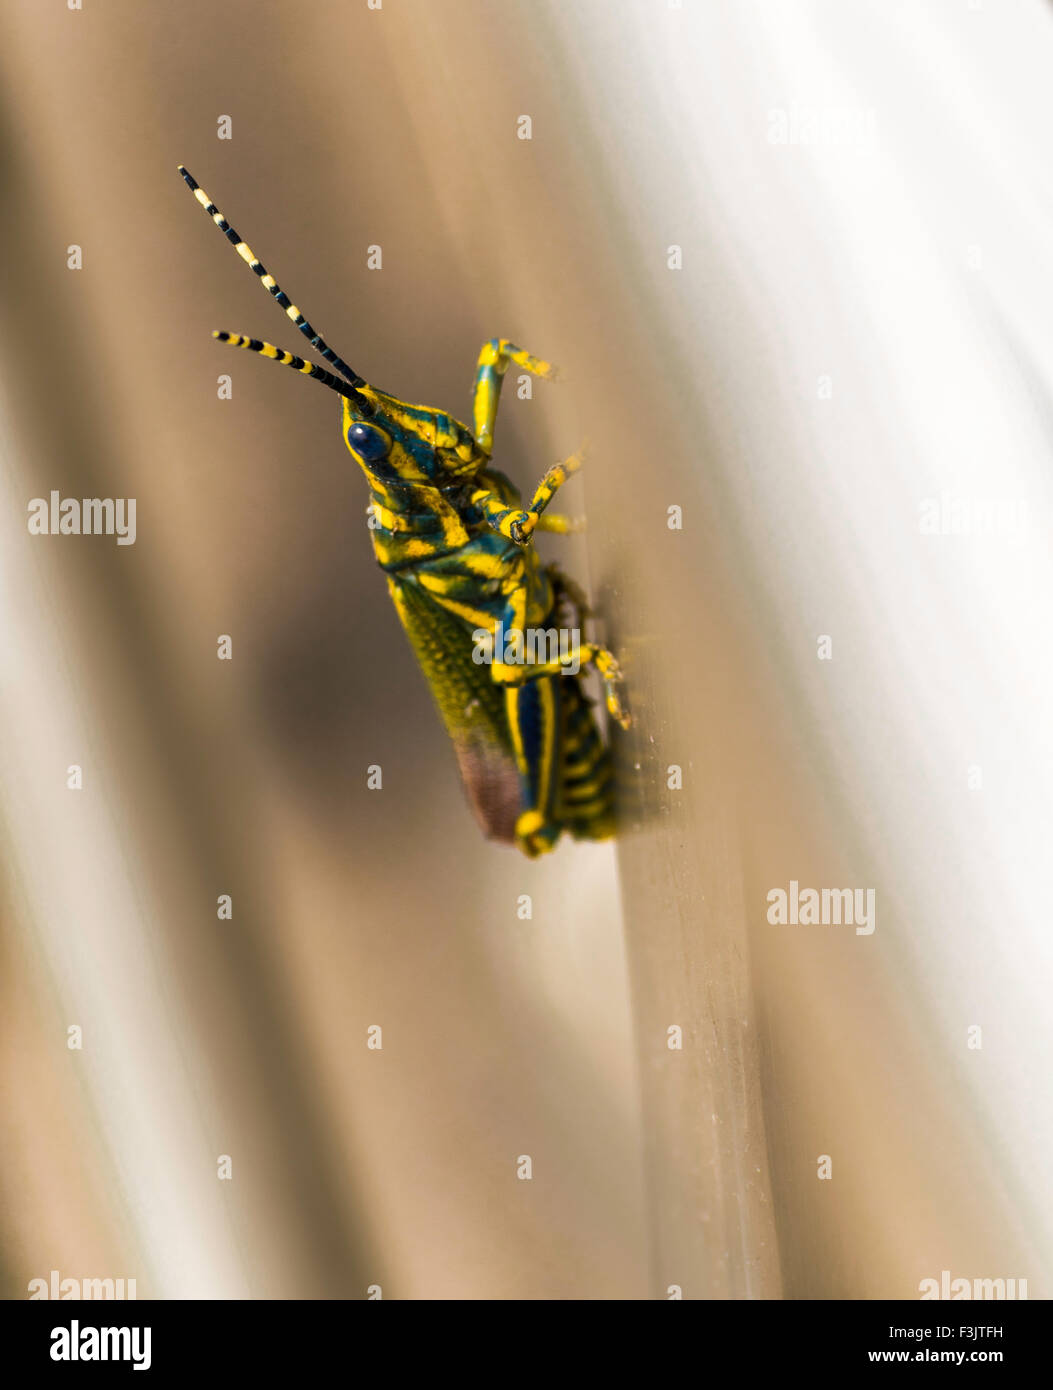 Gaudy grass hopper on abstract background Stock Photo